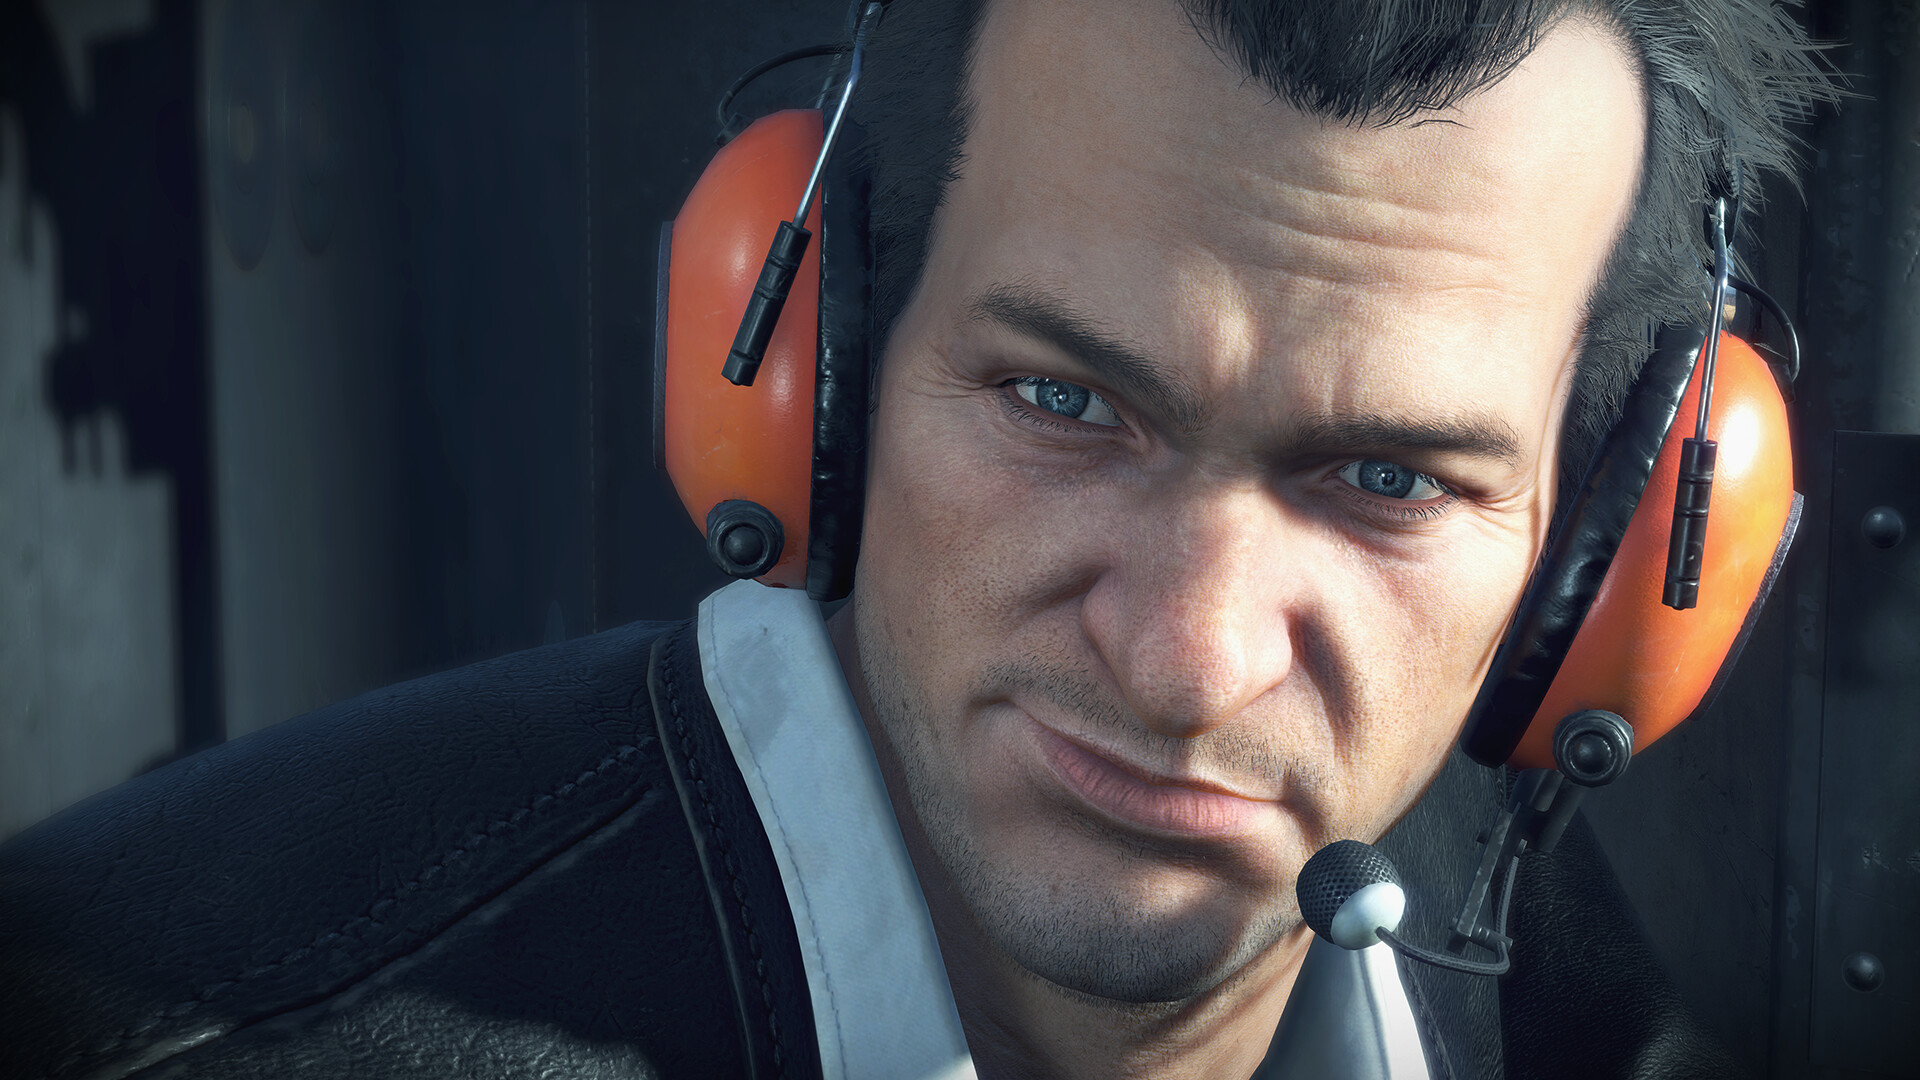 Dead Rising’s original voice actor confirms he will not return to the role